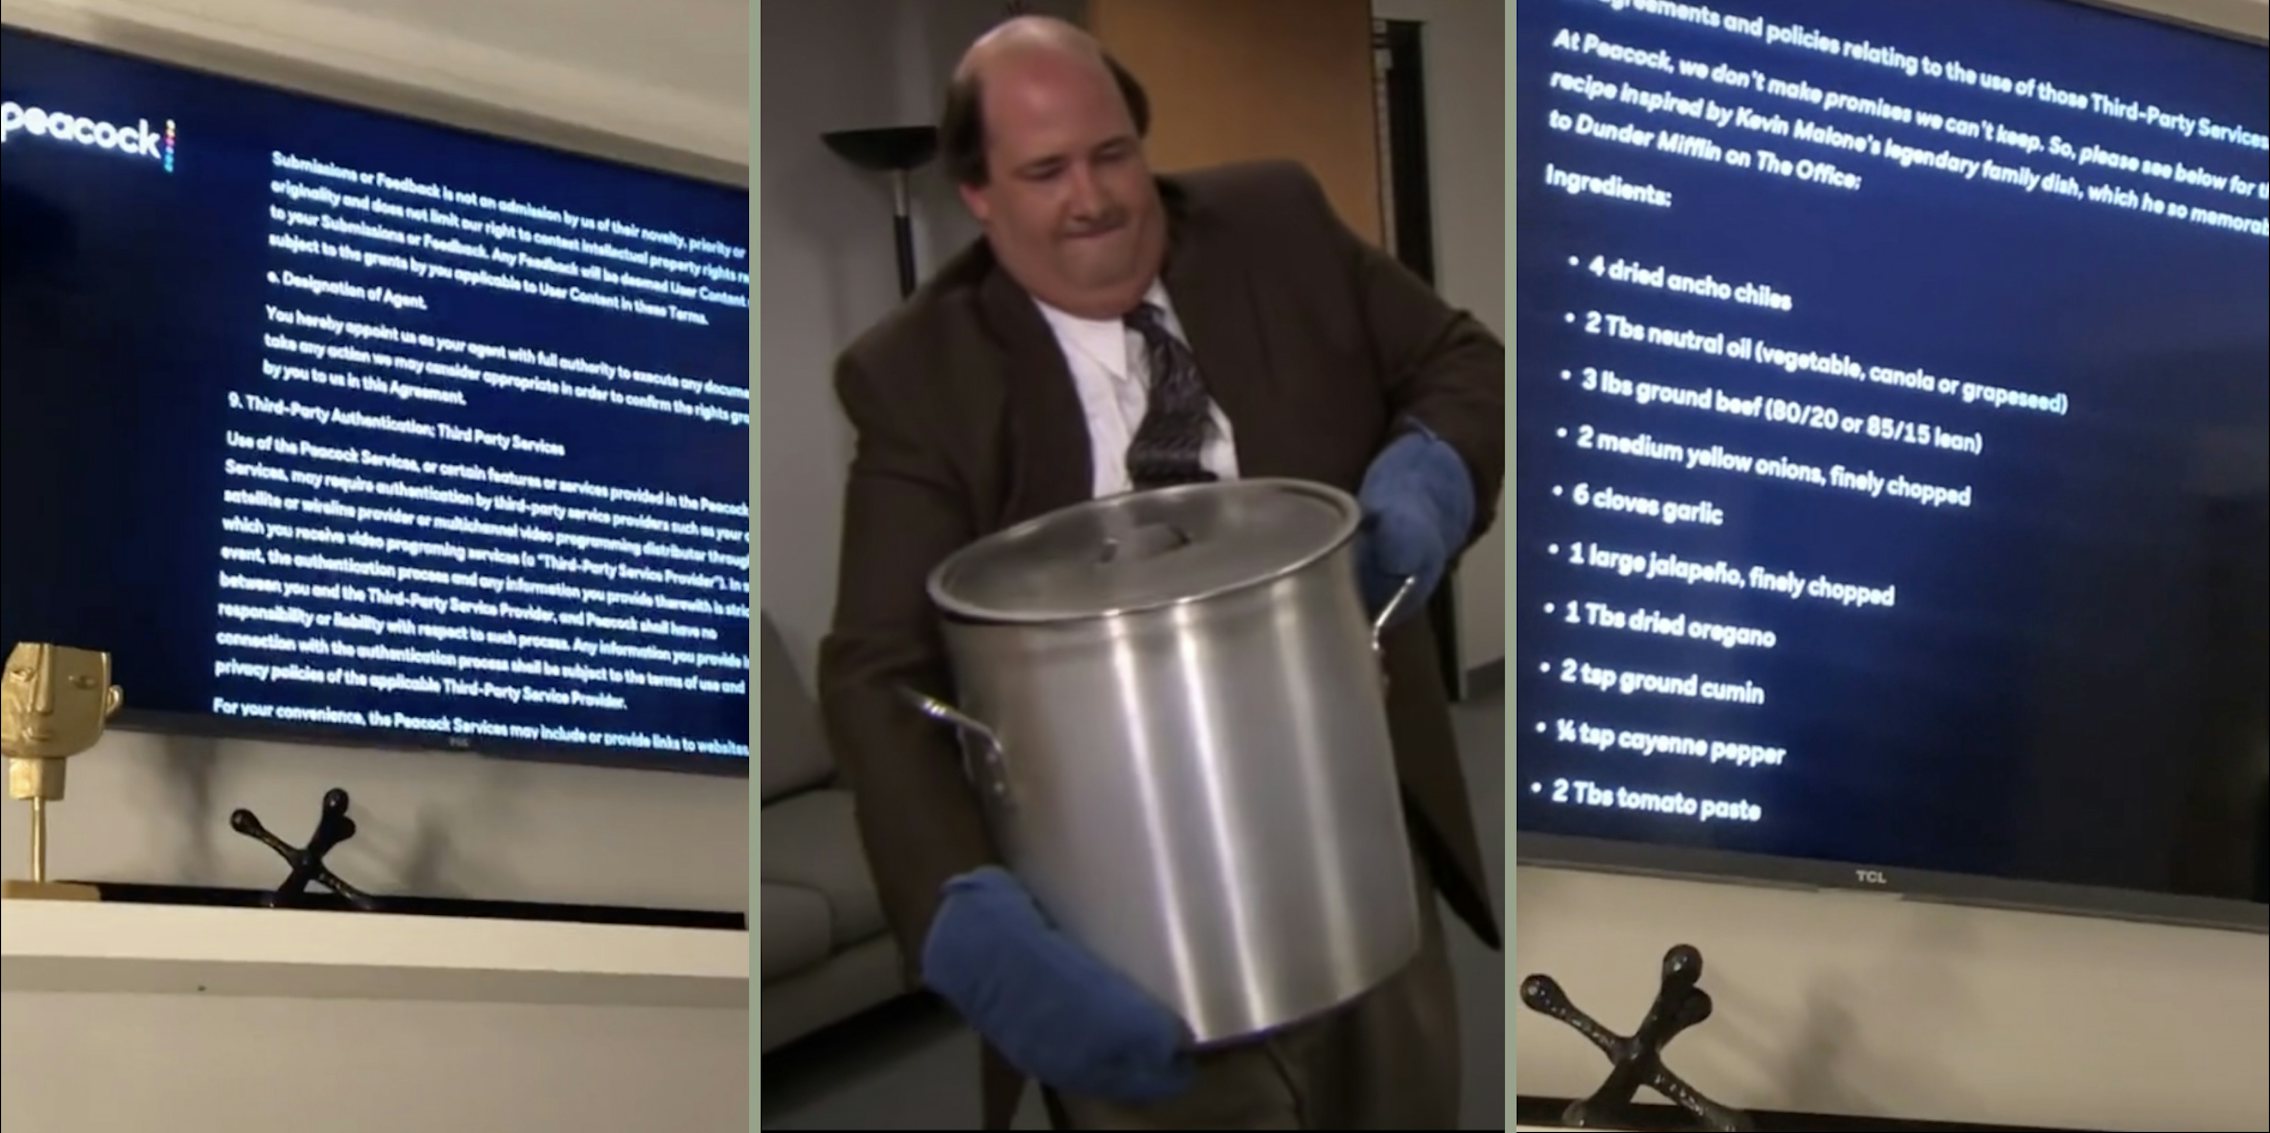 TikToker Finds 'The Office' Chili Recipe in Peacock's Terms and Conditions